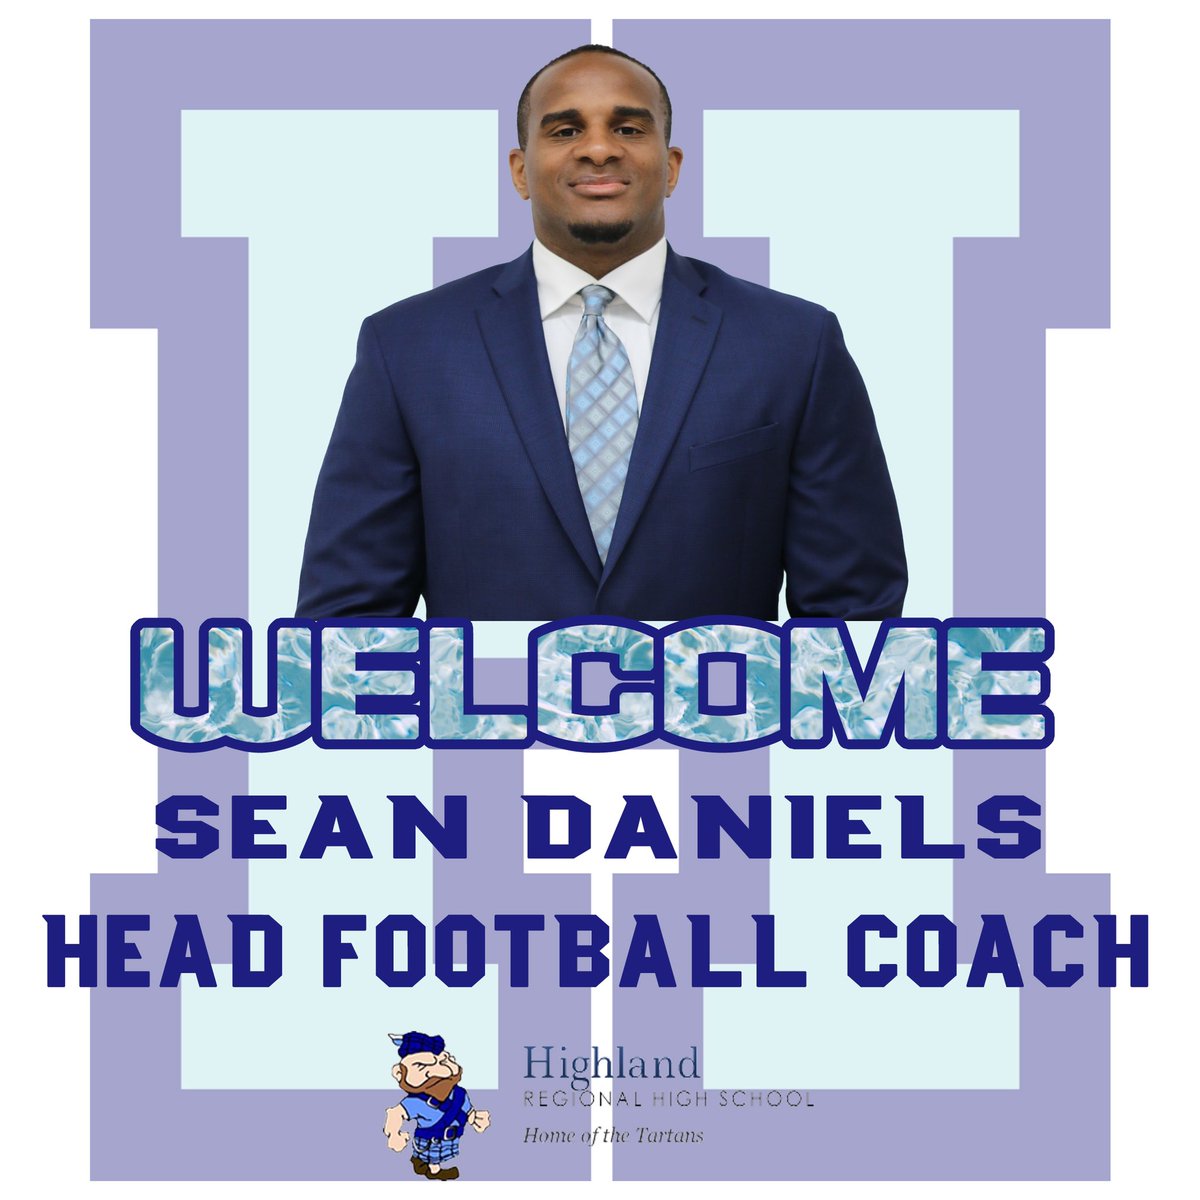 Highland Tartans Football Program would like to Welcome our New Head Football Coach Sean Daniels! @Sean_Daniels55 Coach Daniels is a graduate of Highland Regional and returns to lead his Alma Mater!